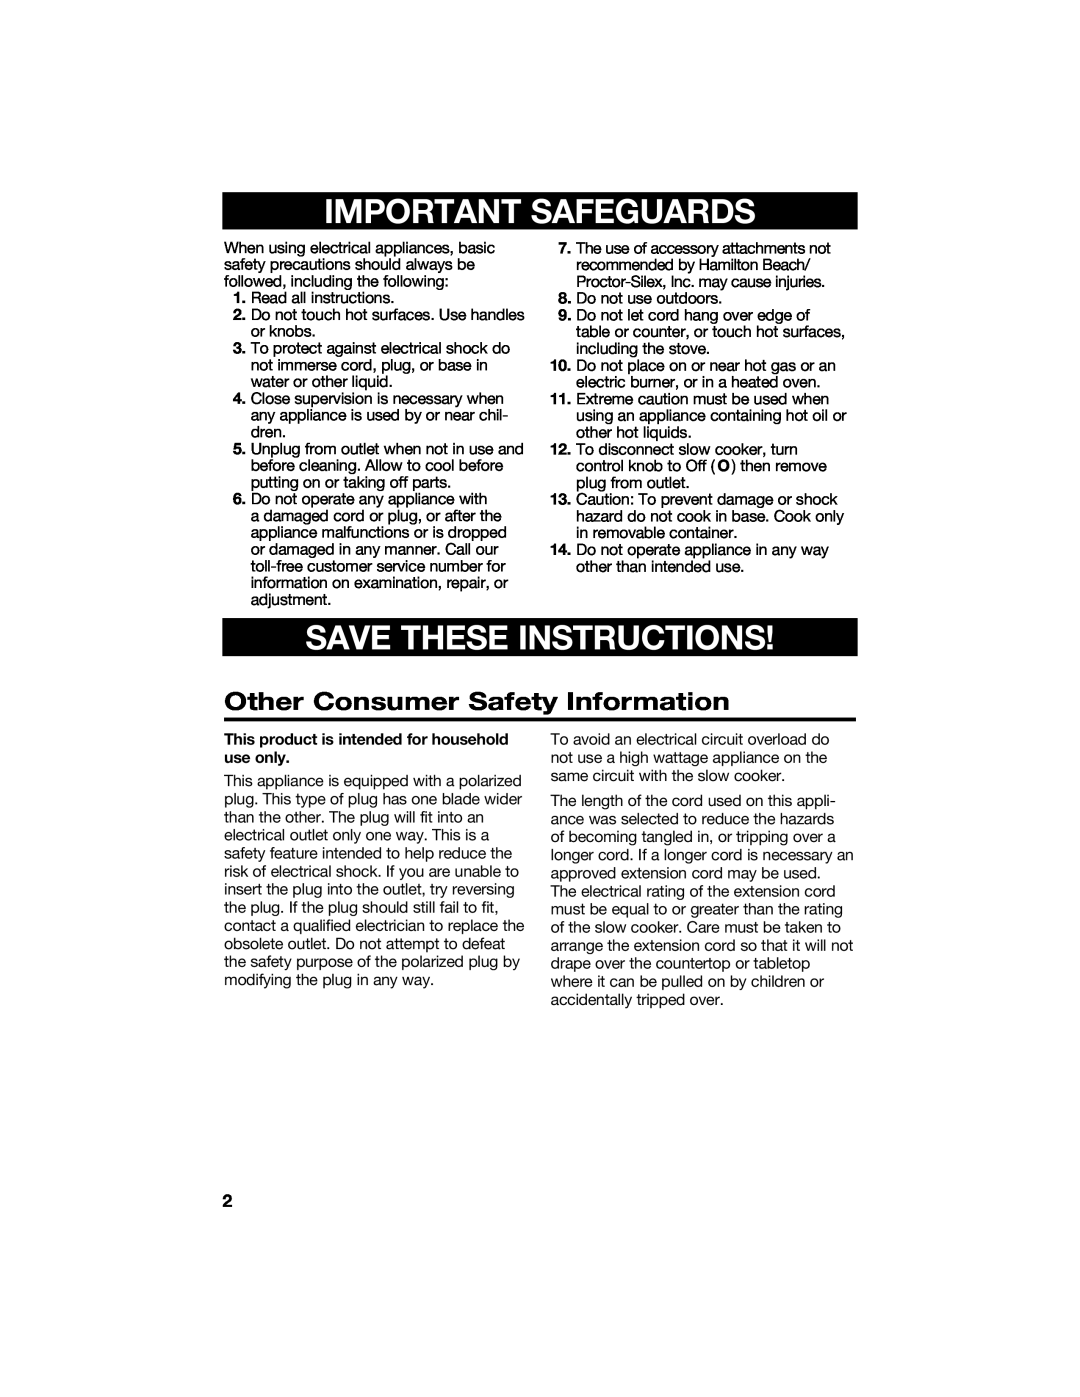 Hamilton Beach 840133300 manual Other Consumer Safety Information, Important Safeguards, Save These Instructions 